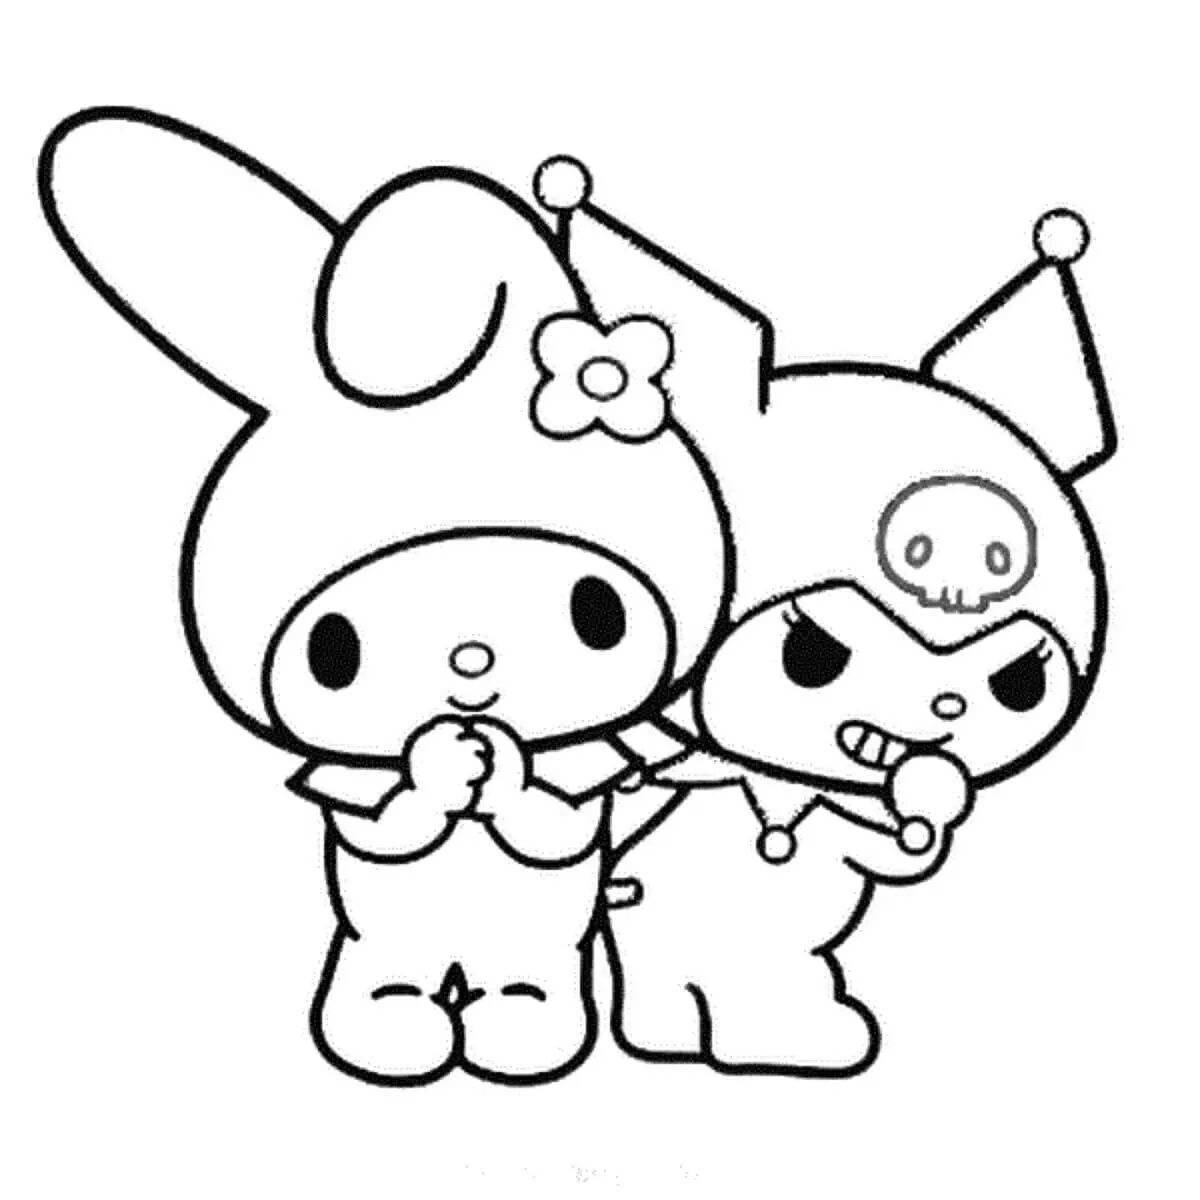 Perfect little hello kitty kuromi coloring page